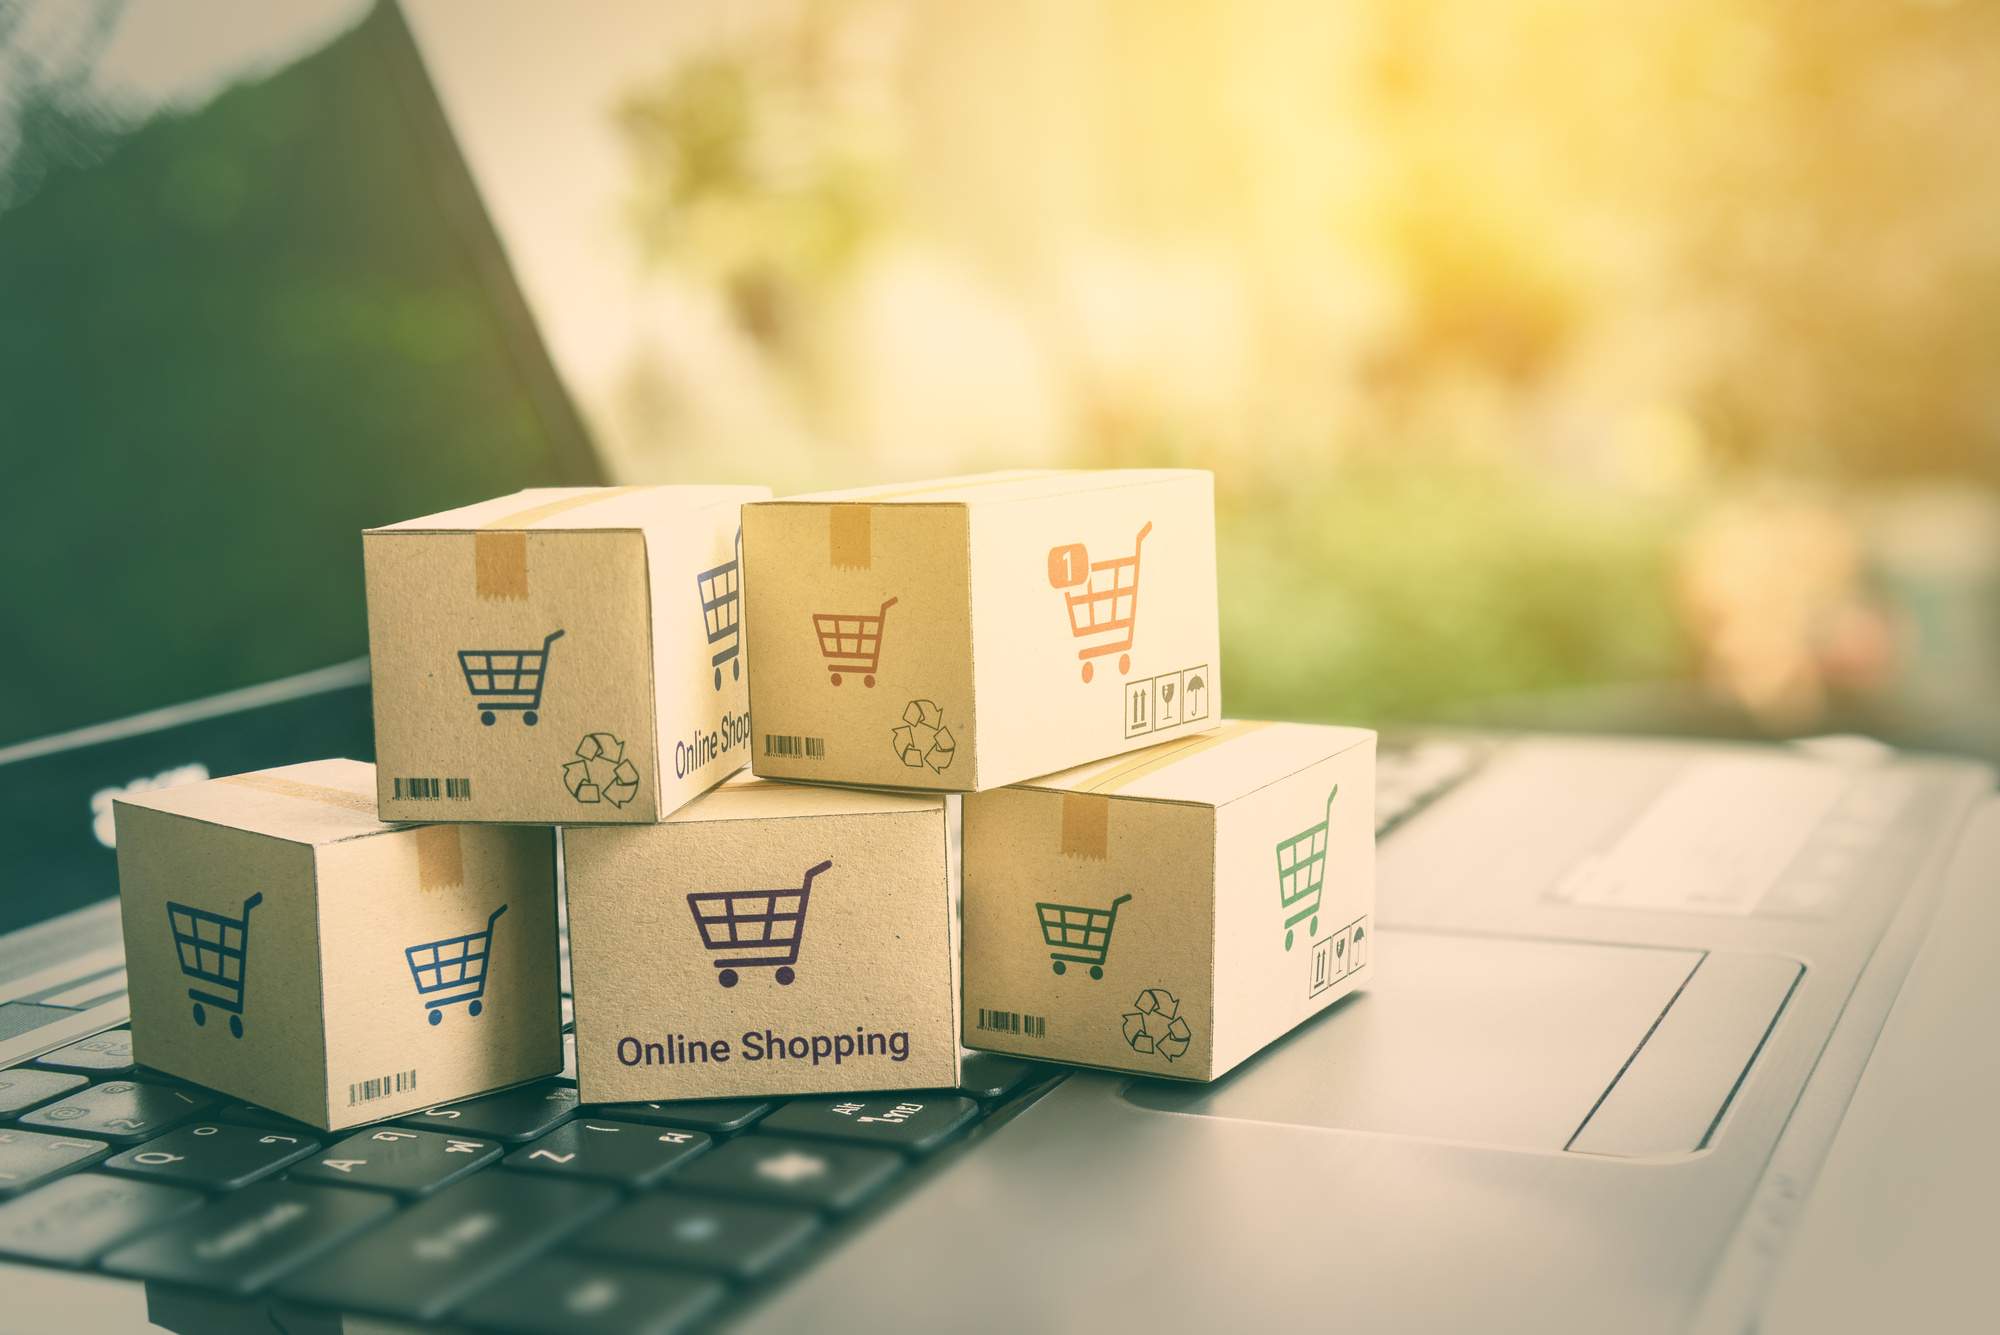 5 Online Drug Shopping Mistakes and How to Avoid Them